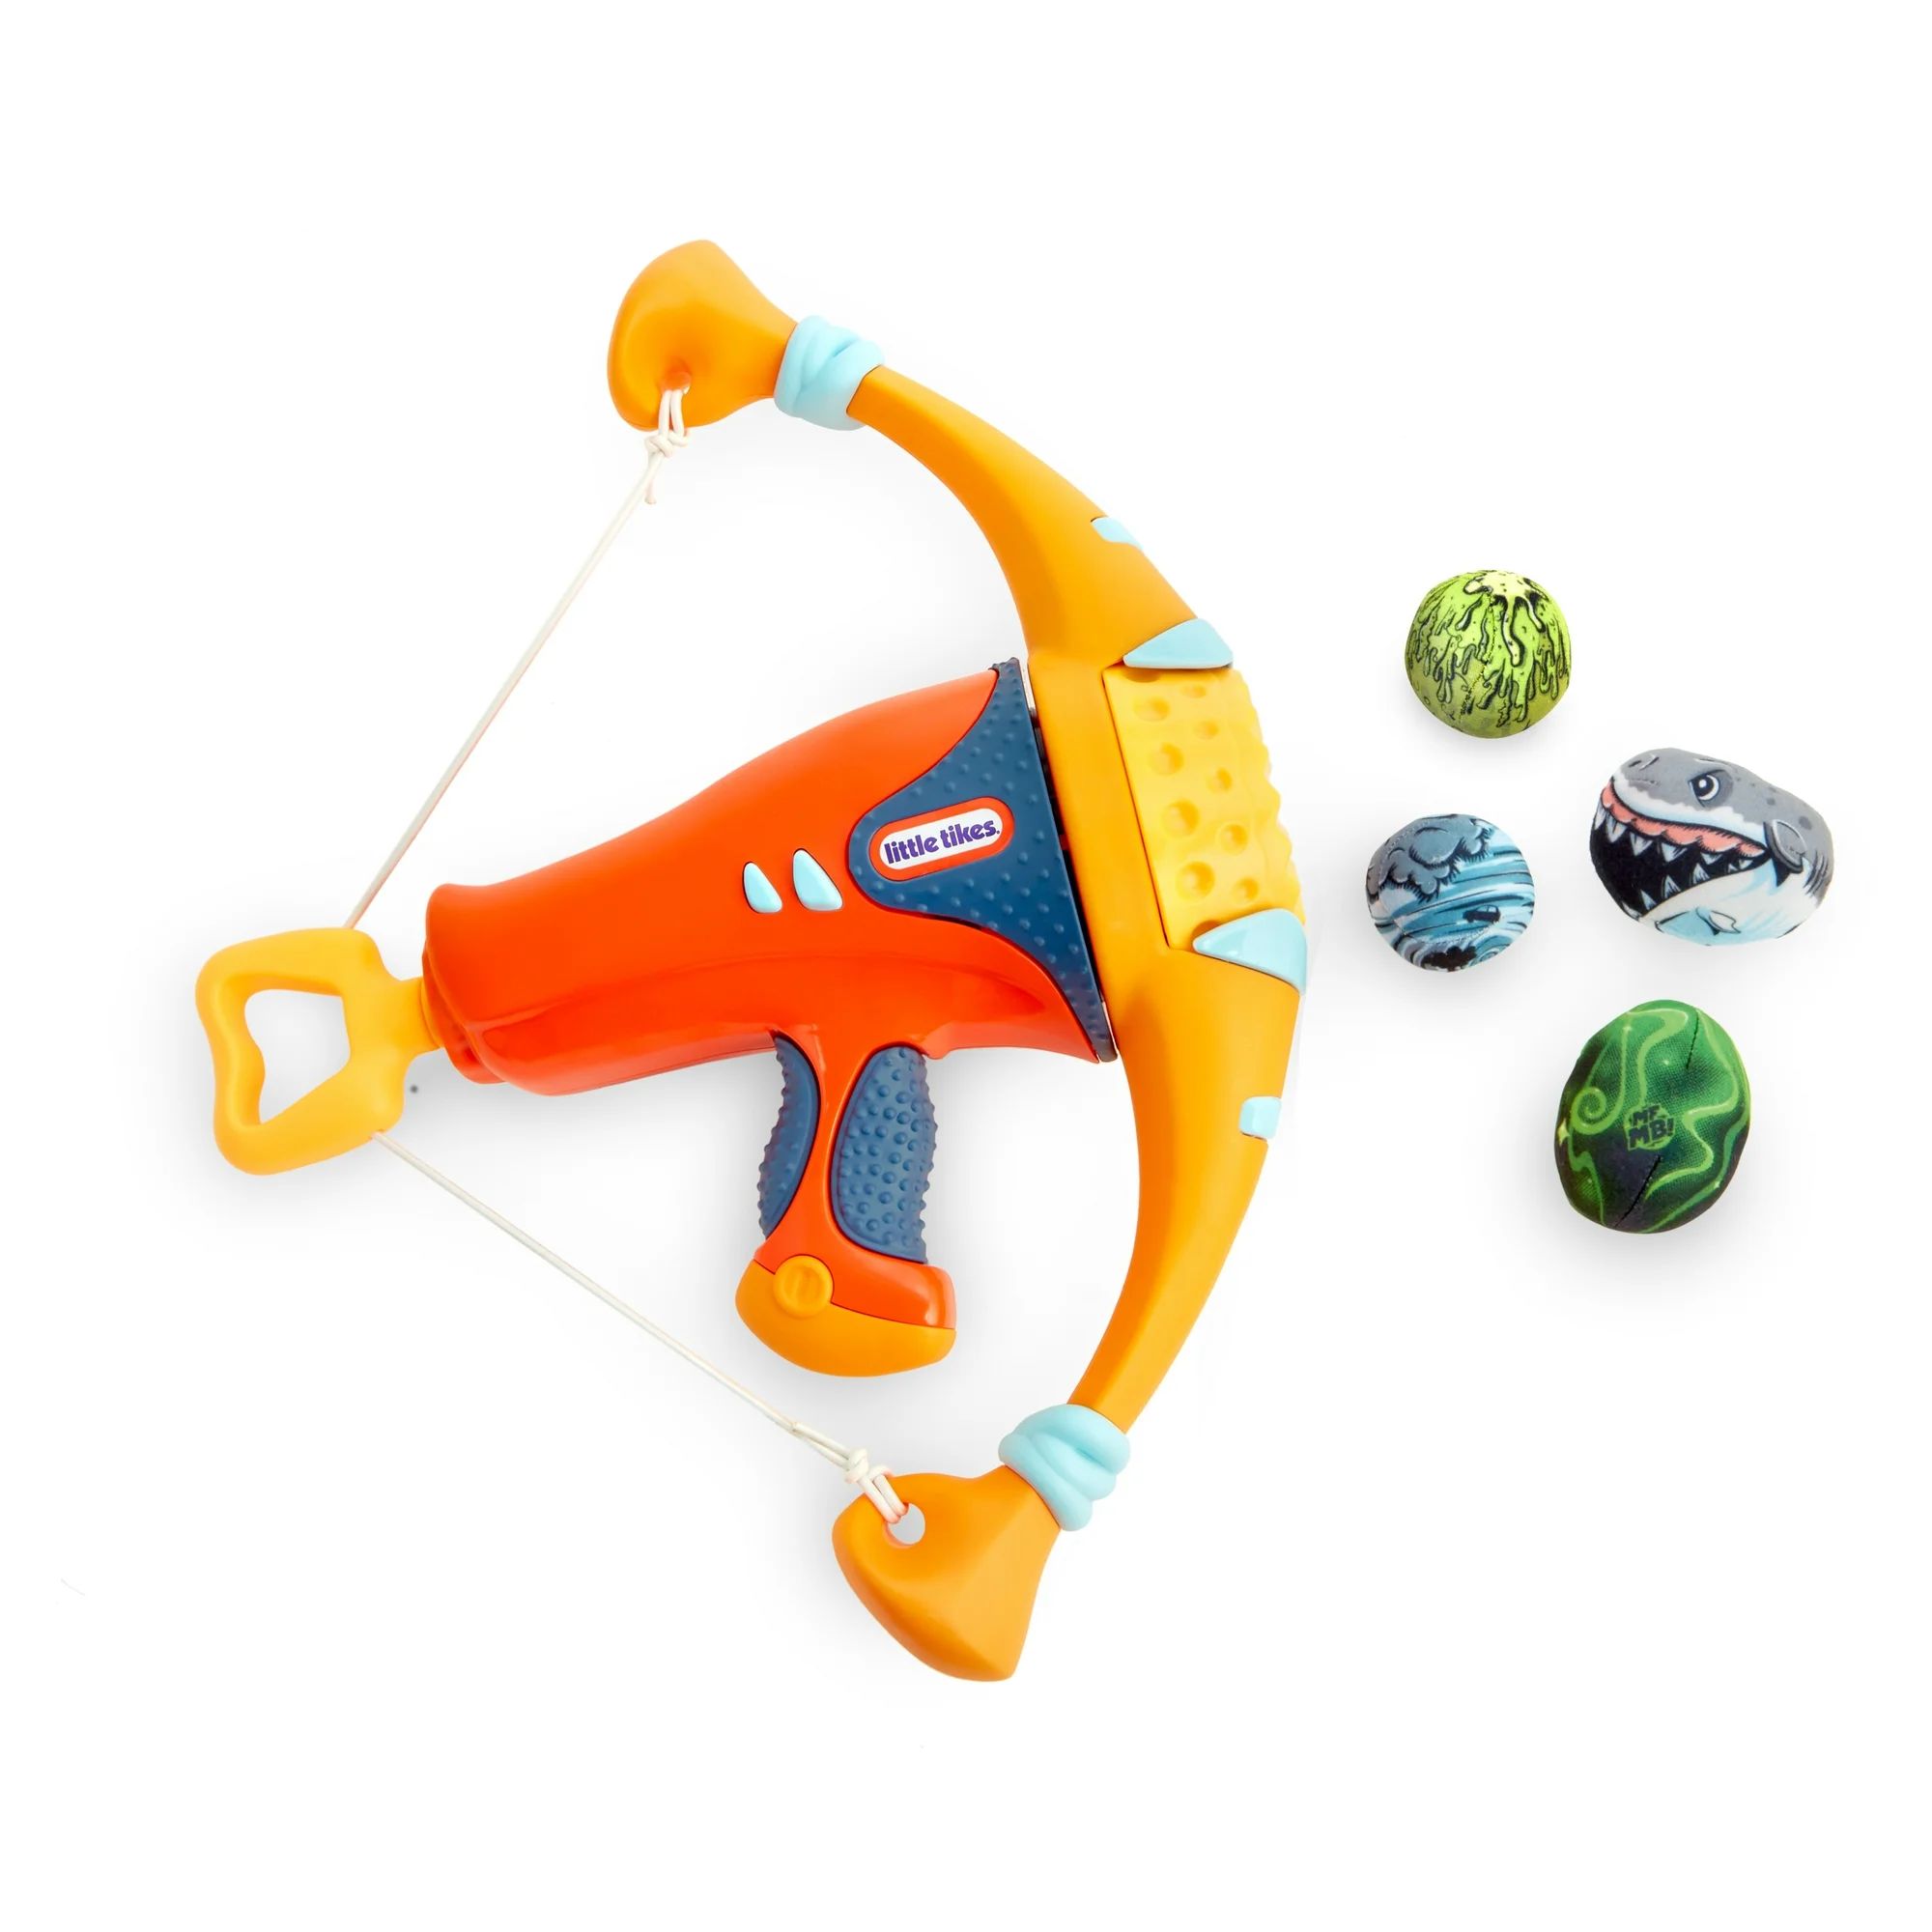 Mighty Blasters Mighty Bow Toy Blaster with 4 Soft Power Pods by Little Tikes | Walmart (US)